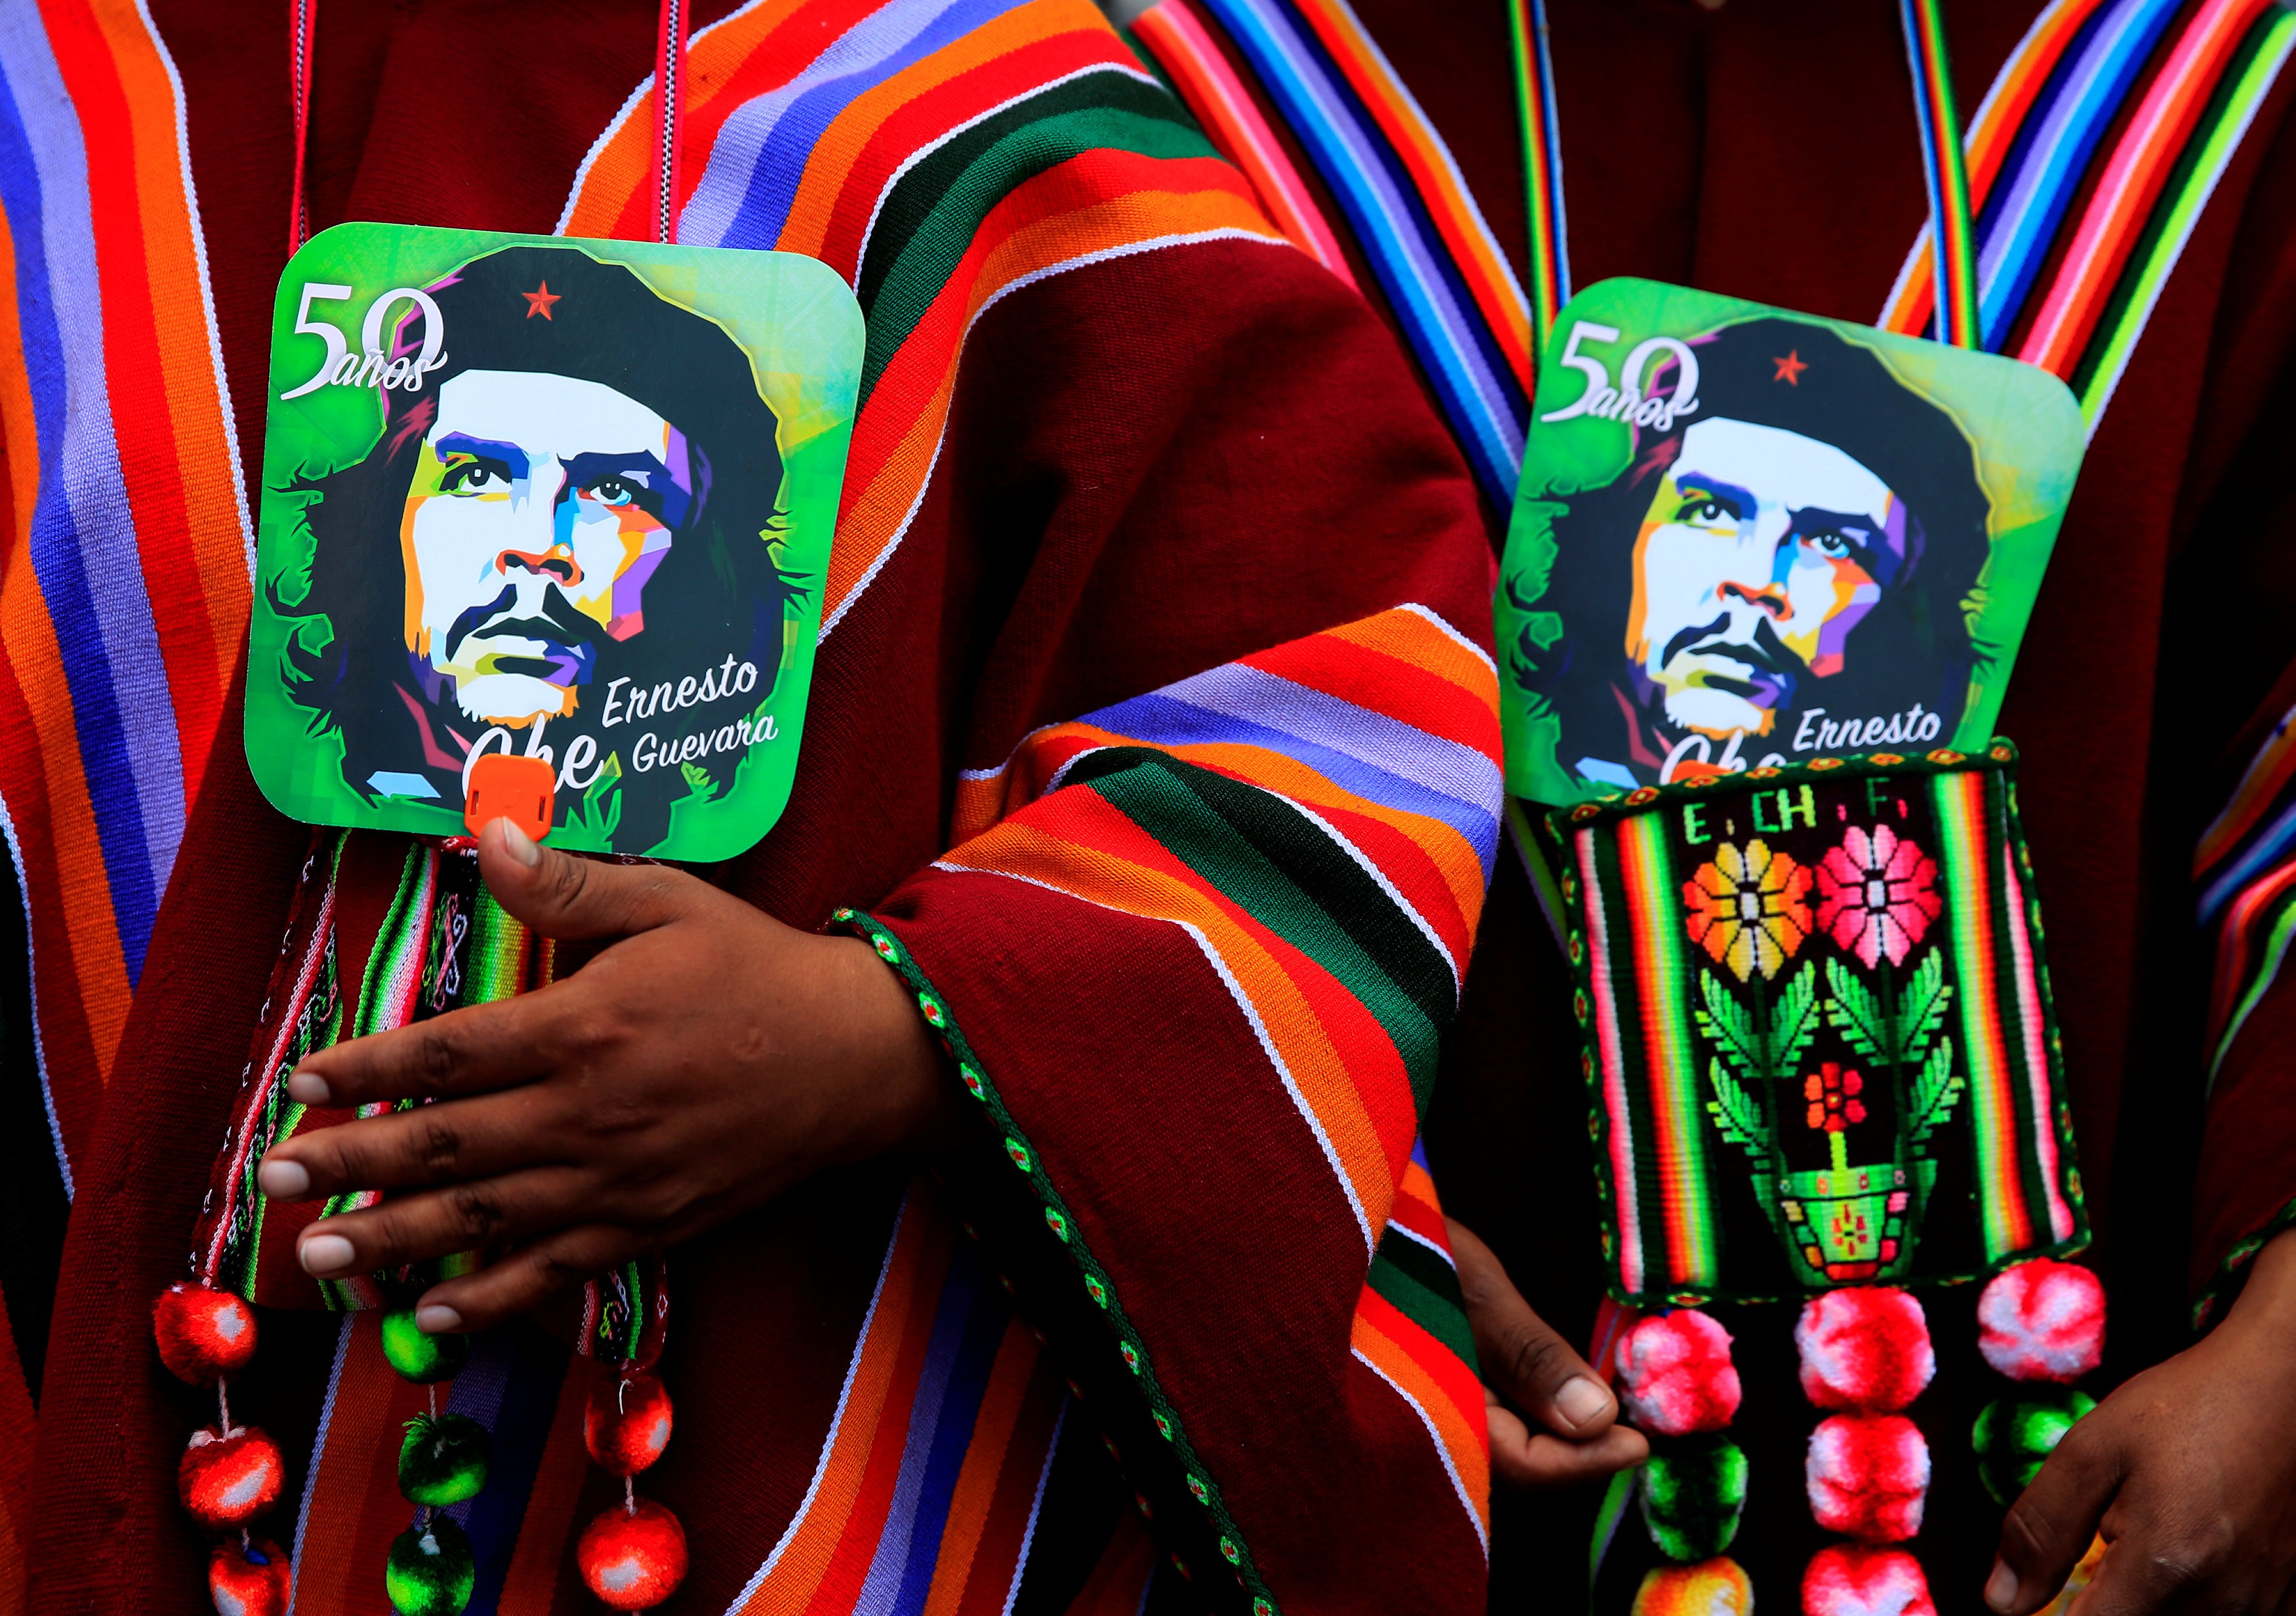 Thousands remember revolutionary Che Guevara on 50th anniversary